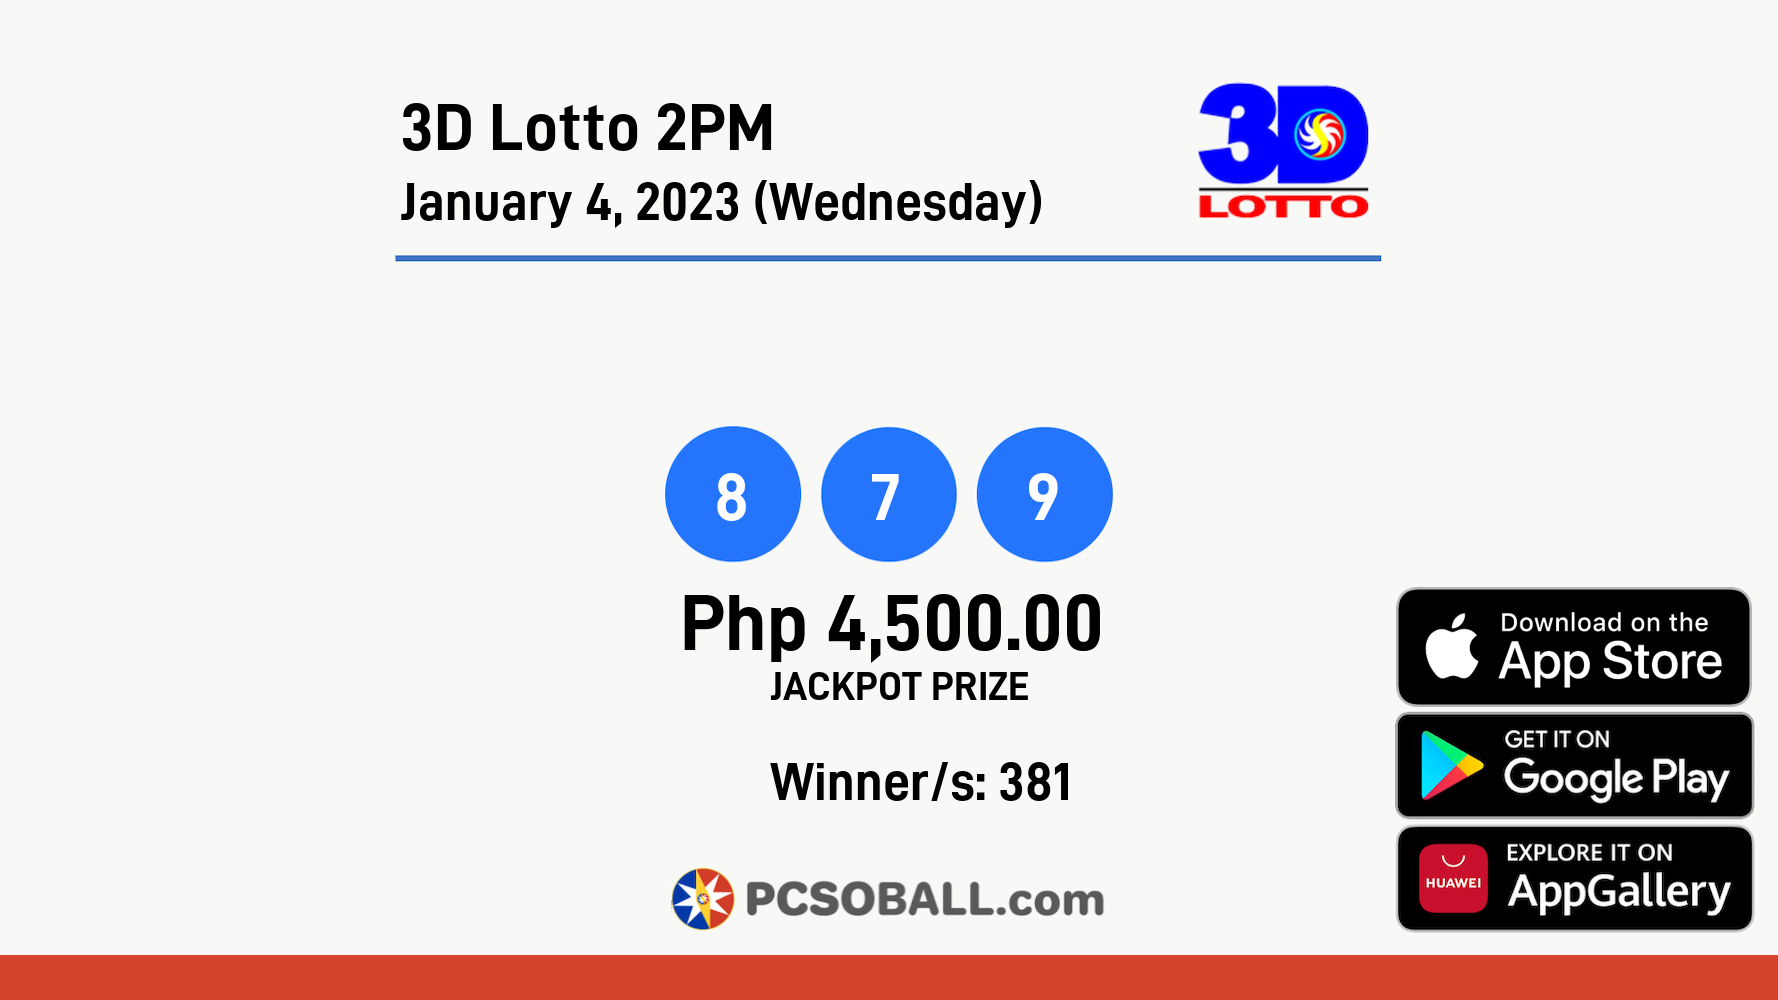 3D Lotto 2PM January 4, 2023 (Wednesday) Result